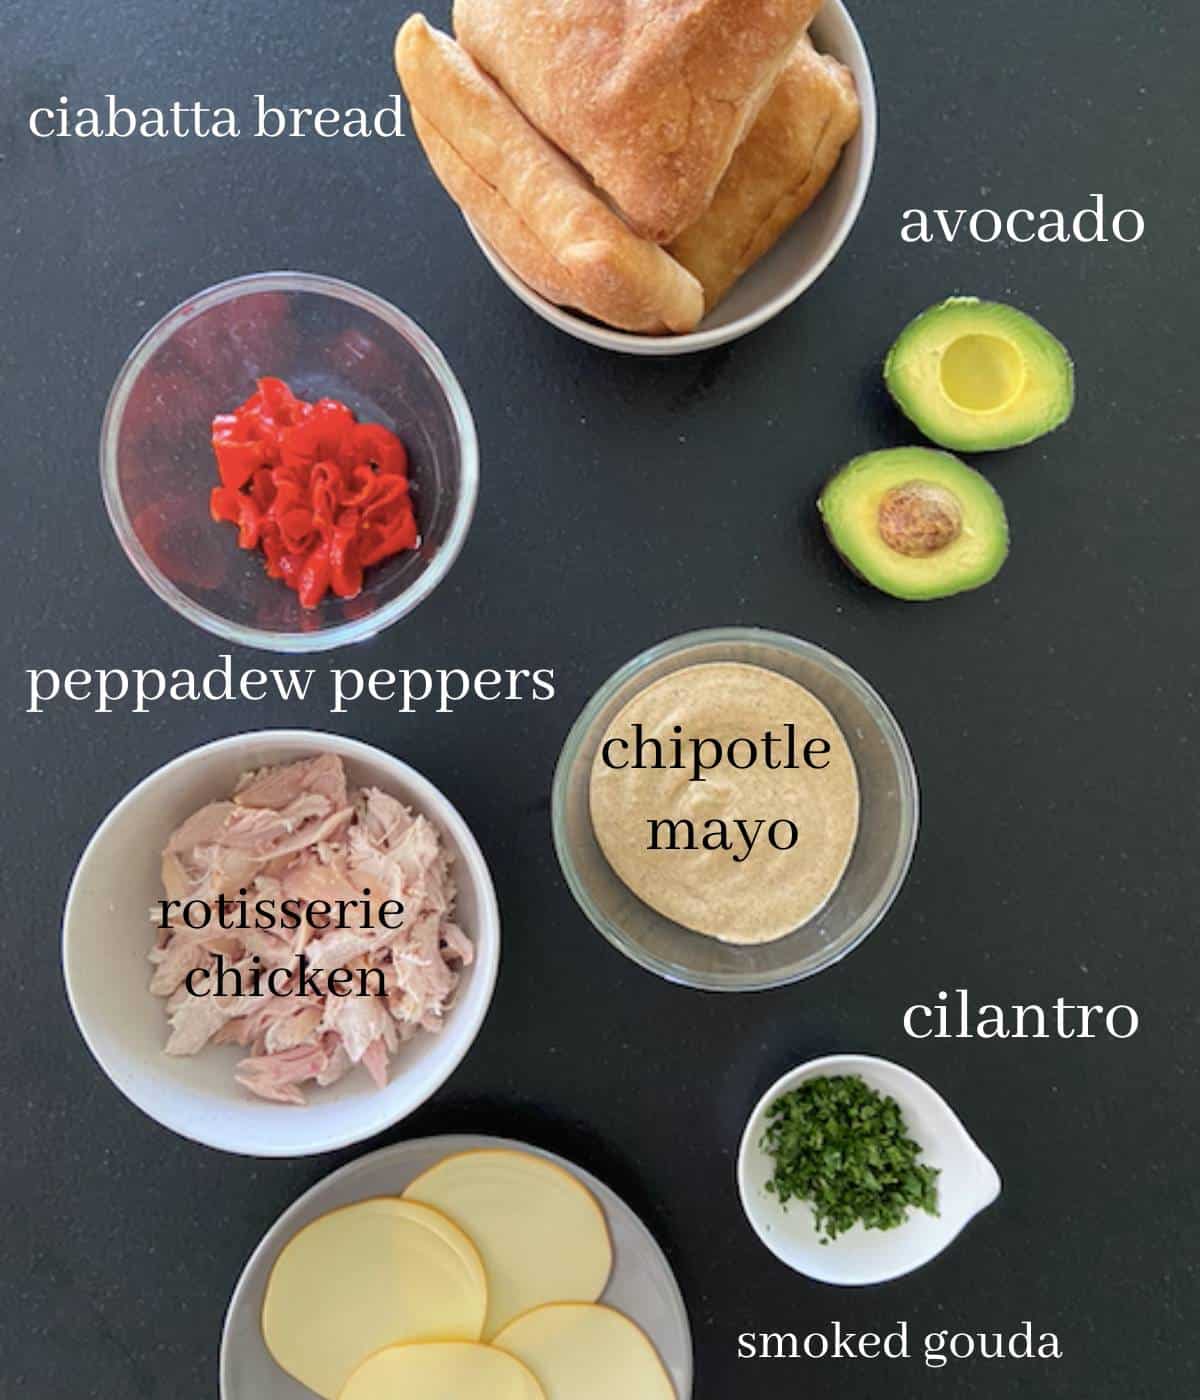 Ingredients for Chipotle Chicken Avocado Melt